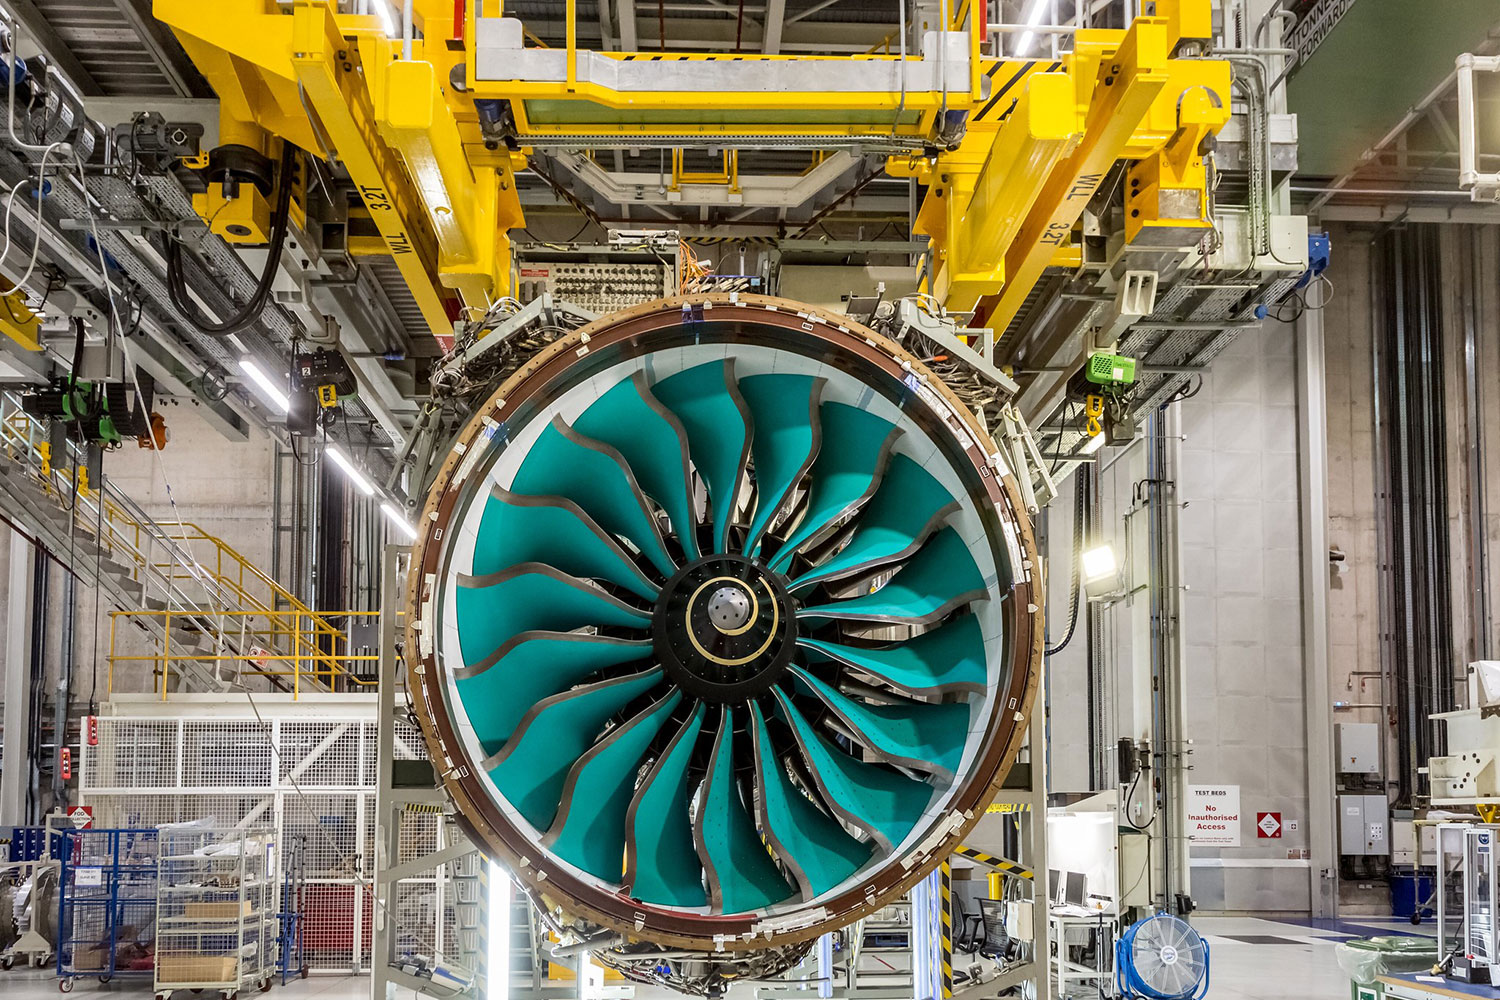 The World’s Largest Aircraft Engine Is Fully Functional and Now Ready For Testing